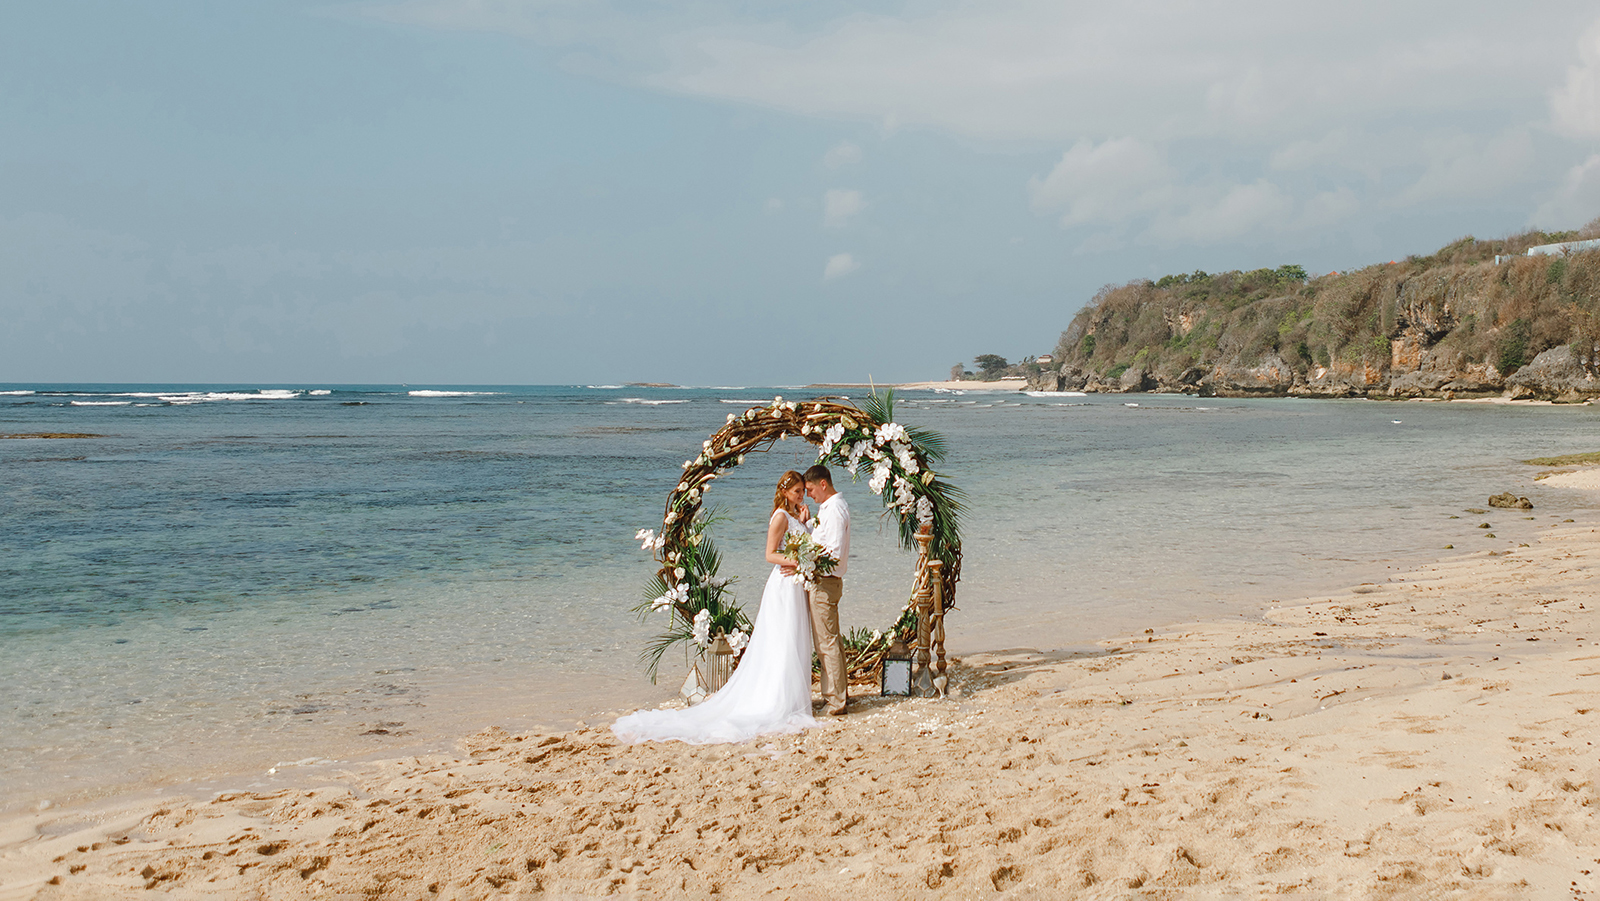 Romantick wedding cople standing on the beach near round wooden arch in boho rustc style after ceremony by the sea. Moment of tenderness and love. Beach wedding Bali